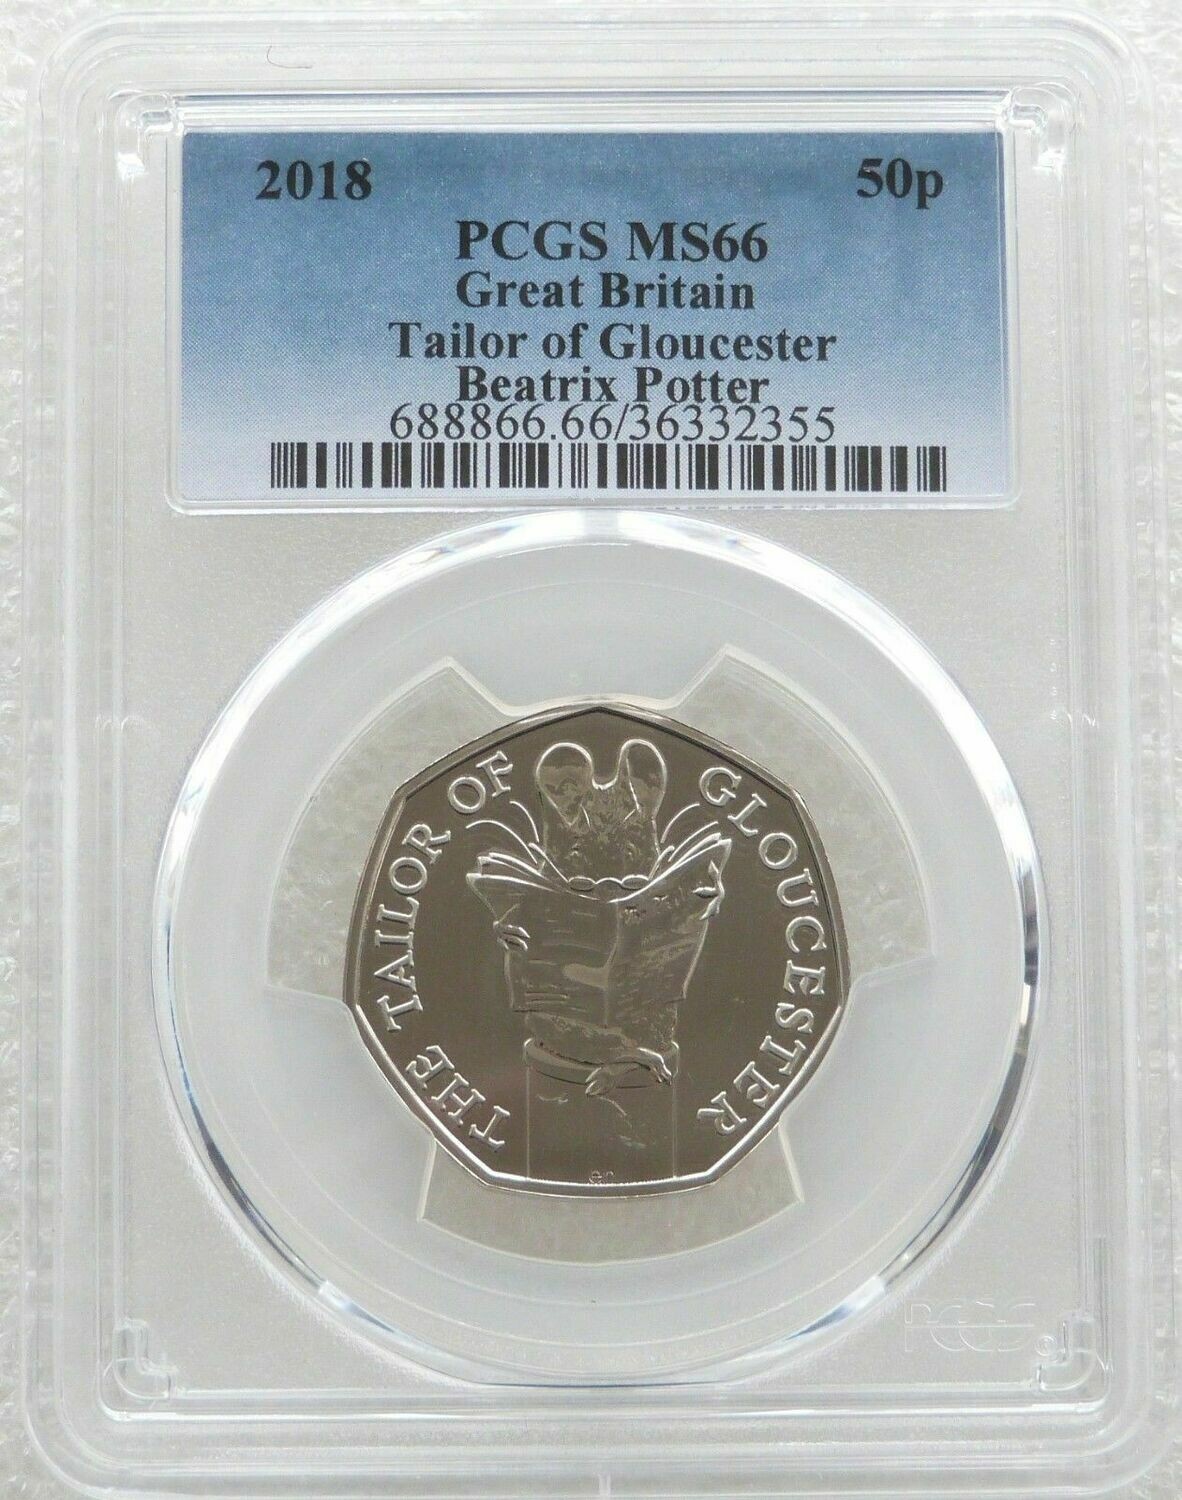 2018 Tailor of Gloucester 50p Brilliant Uncirculated Coin PCGS MS66